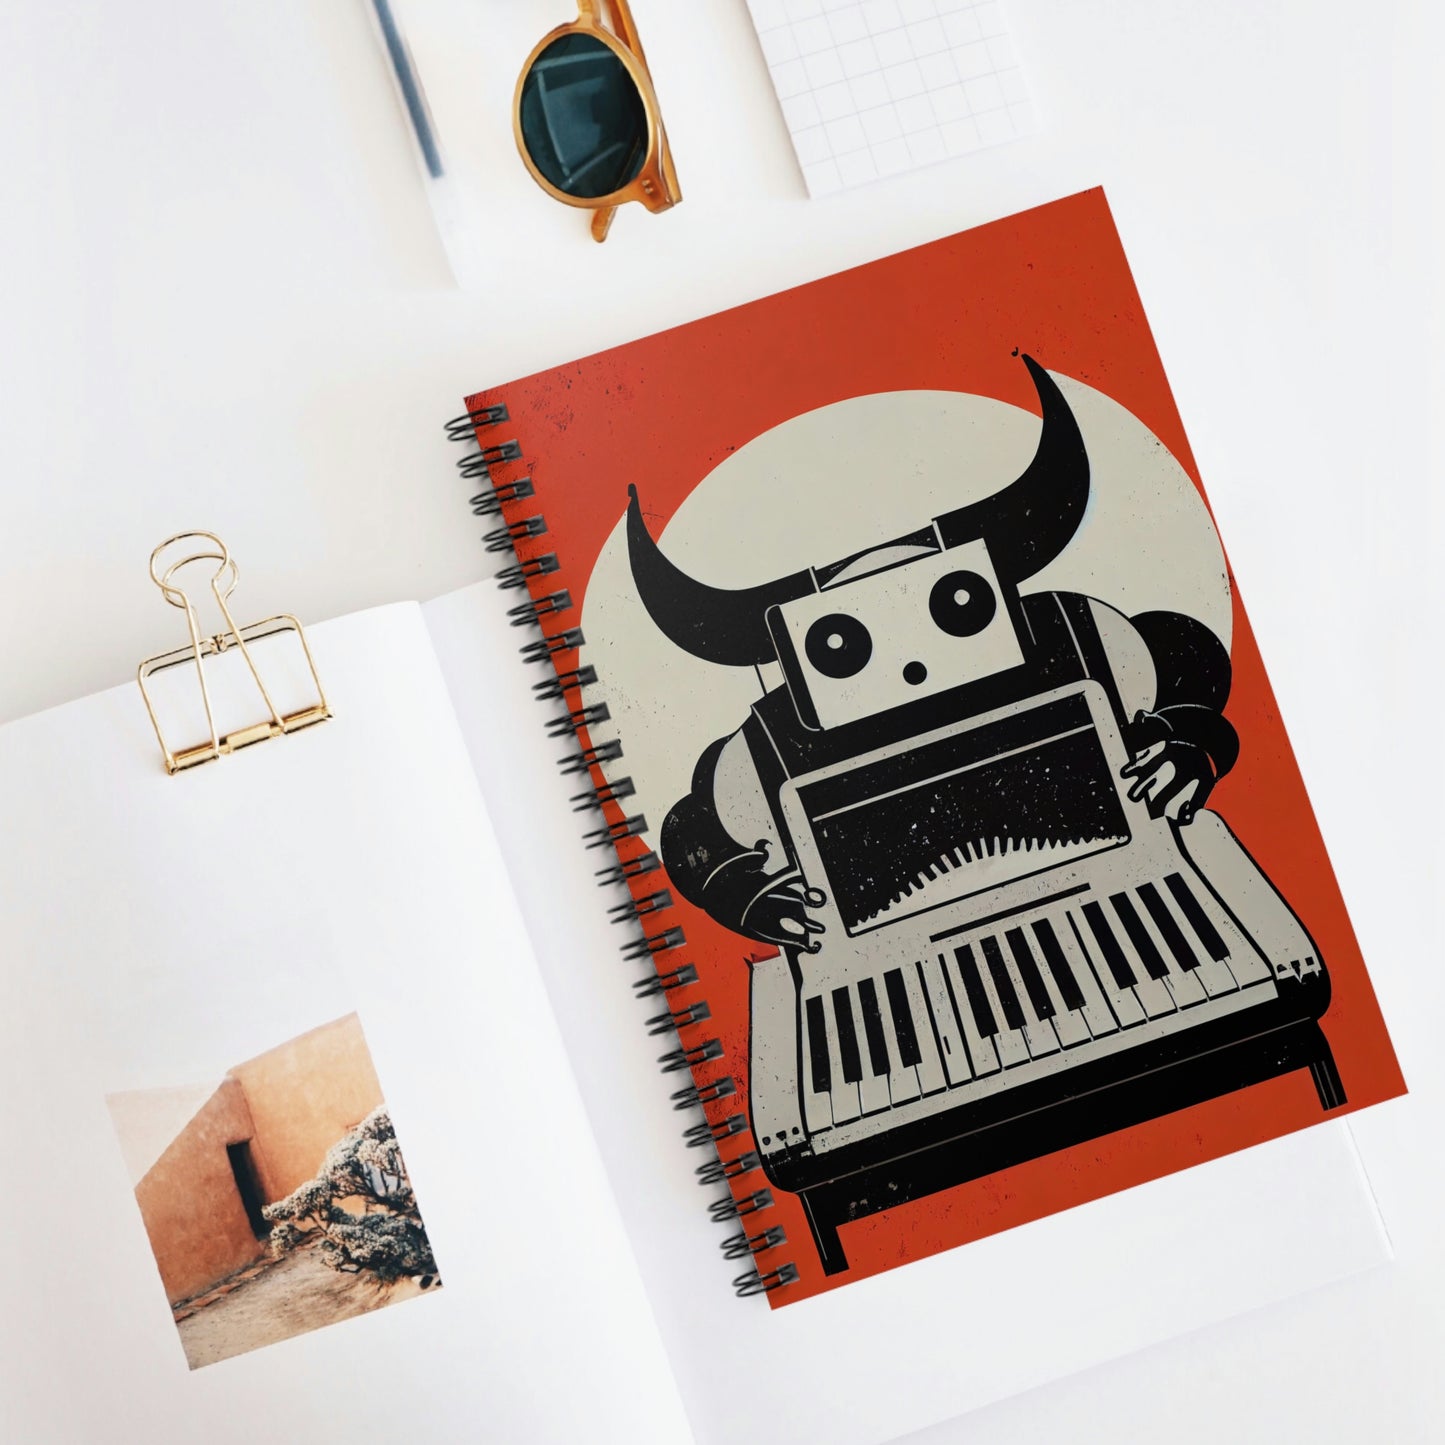 Print #22 - Three Cats Series One: More Signal Less Bull$#!+ Spiral Notebook - Ruled Line for Musicians